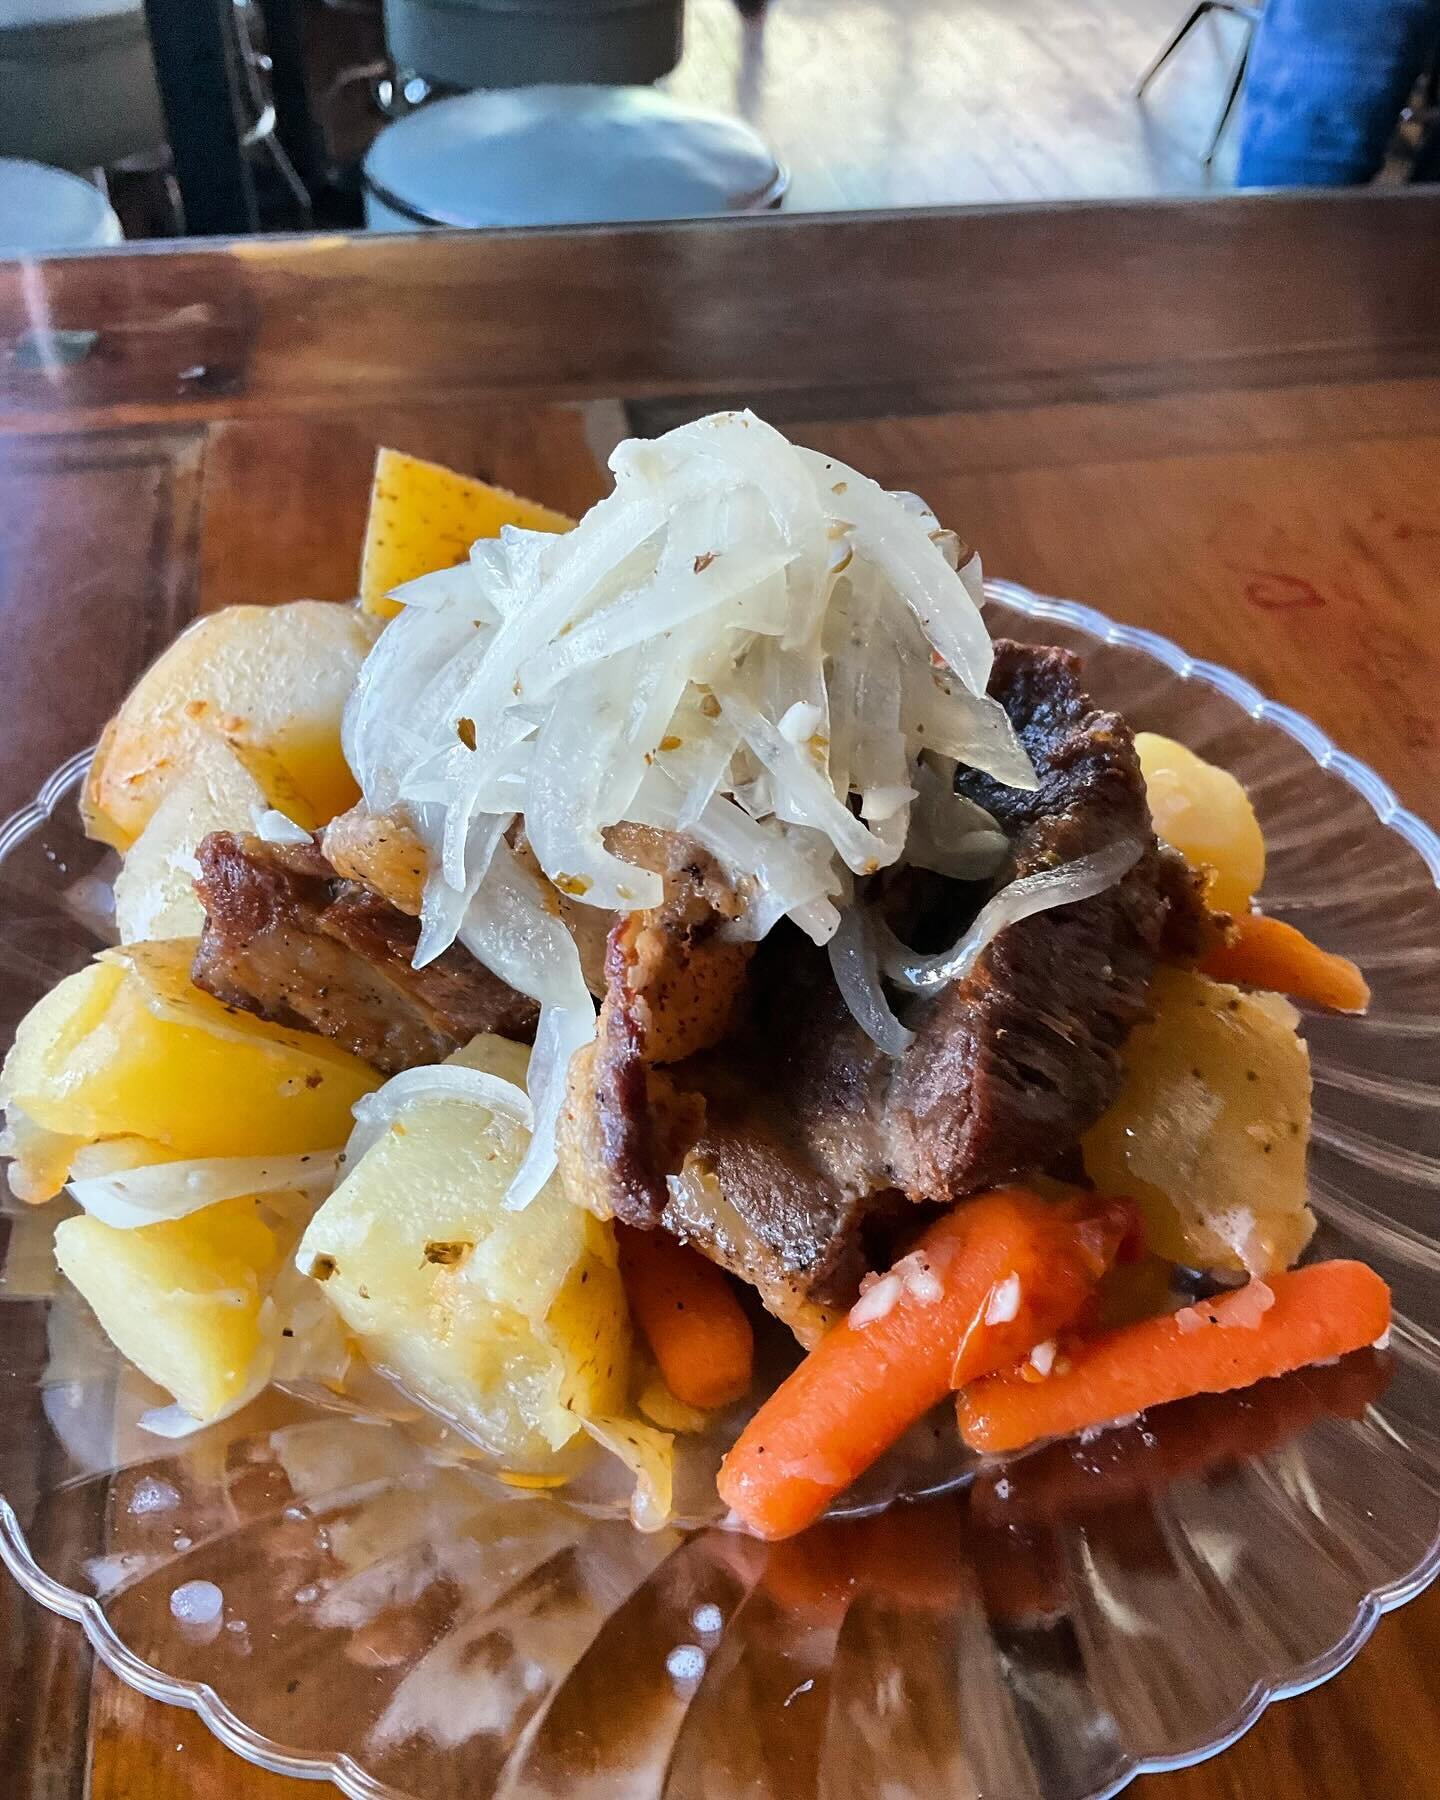 Flash Fried Marinated Mojo Pork Served with Potatoes and Carrots. Available till 4PM!